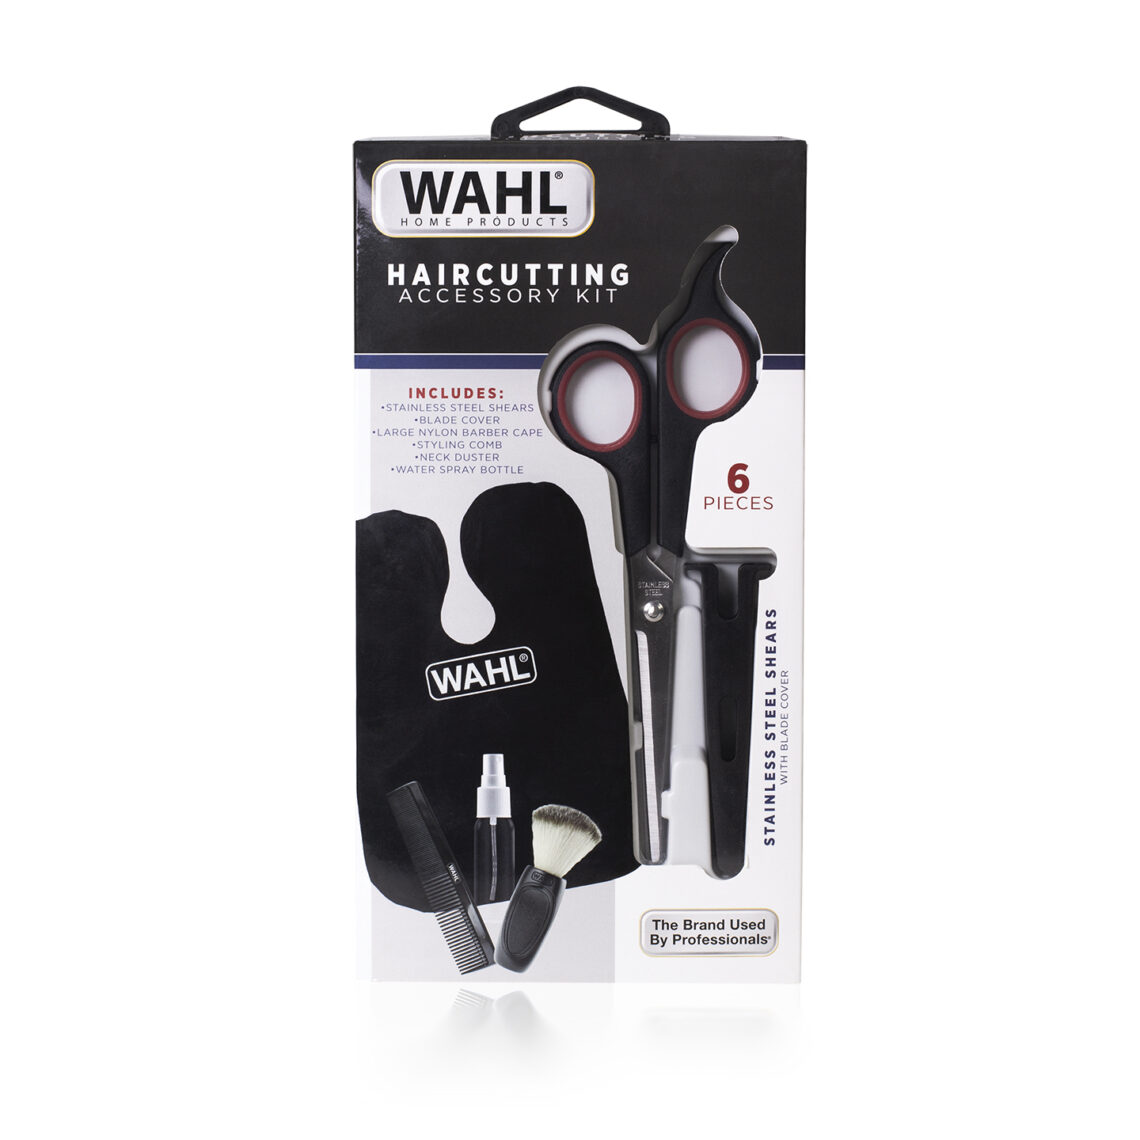 wahl limited edition magic clip